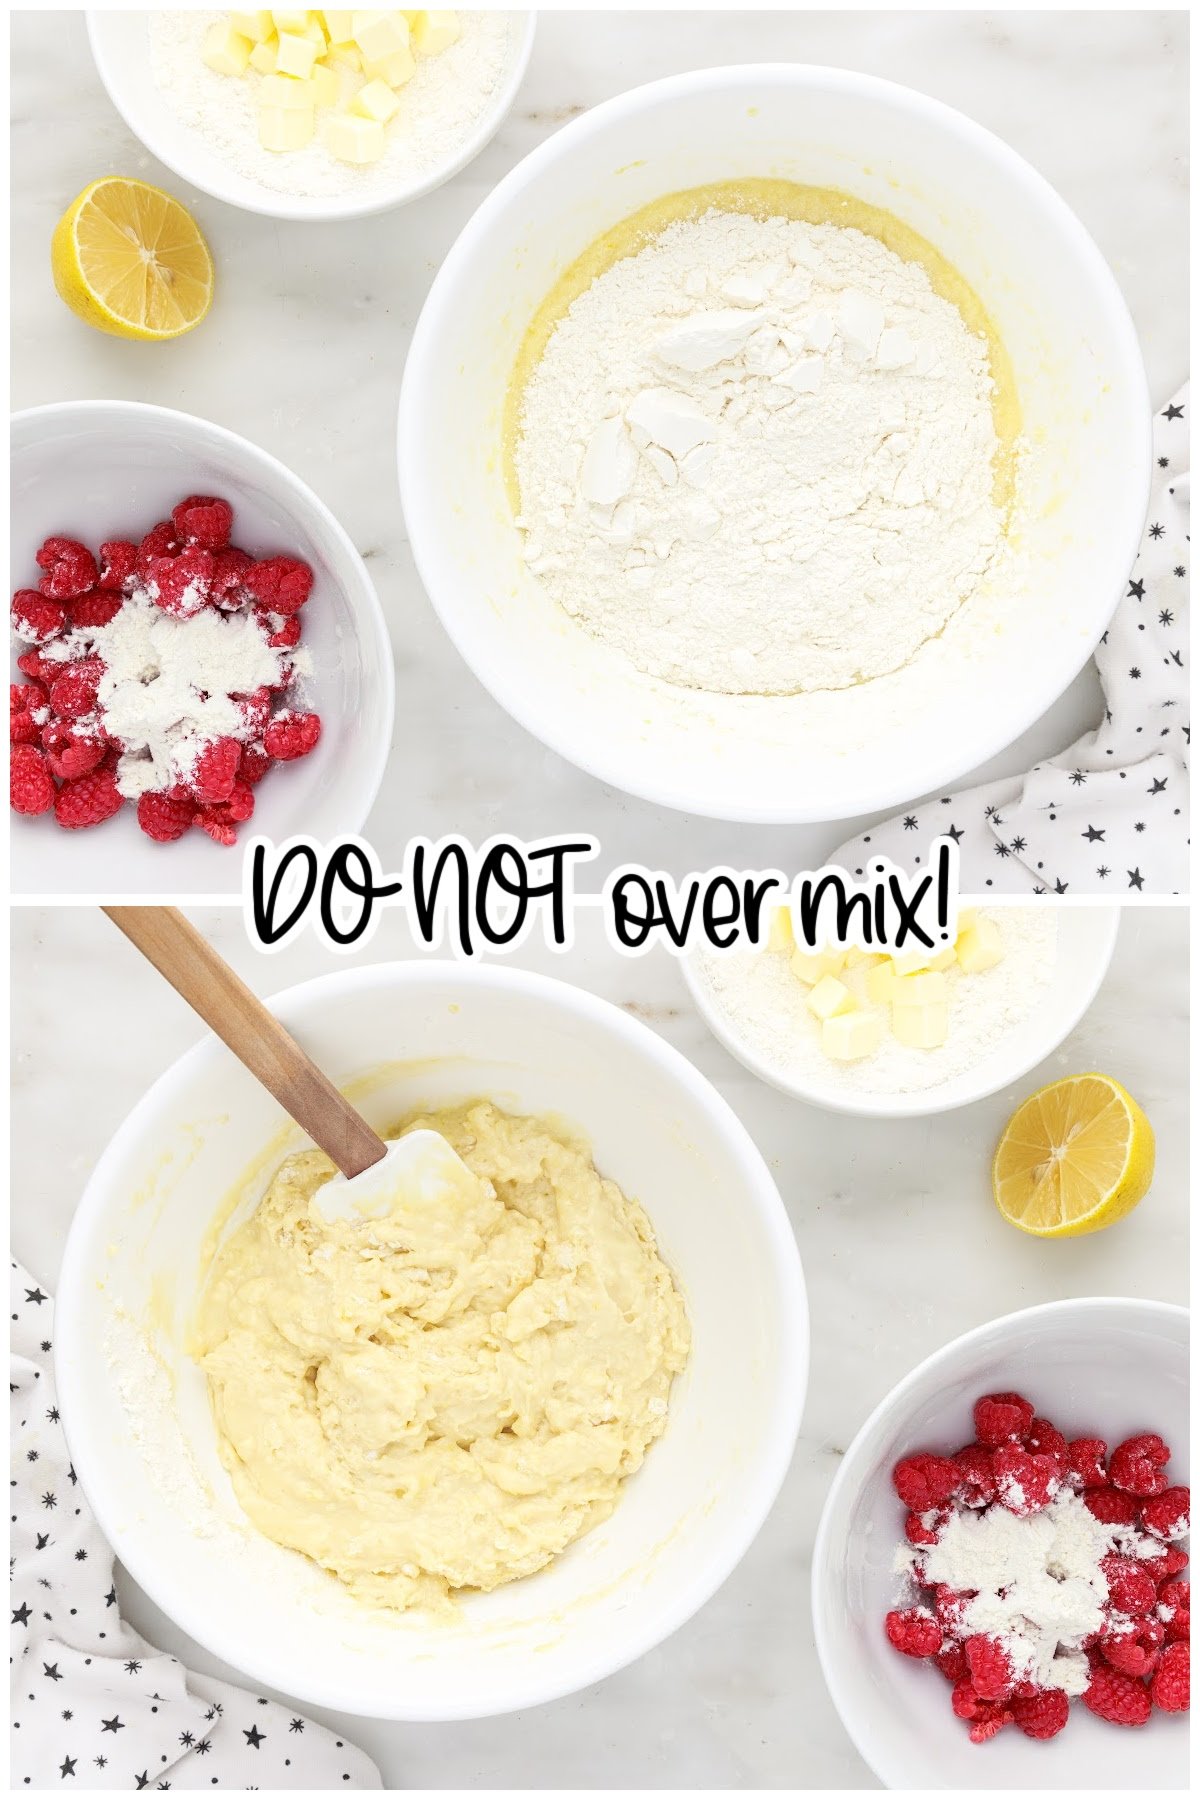 Adding the dry ingredients to the egg mixture with text overlay "do not over mix."